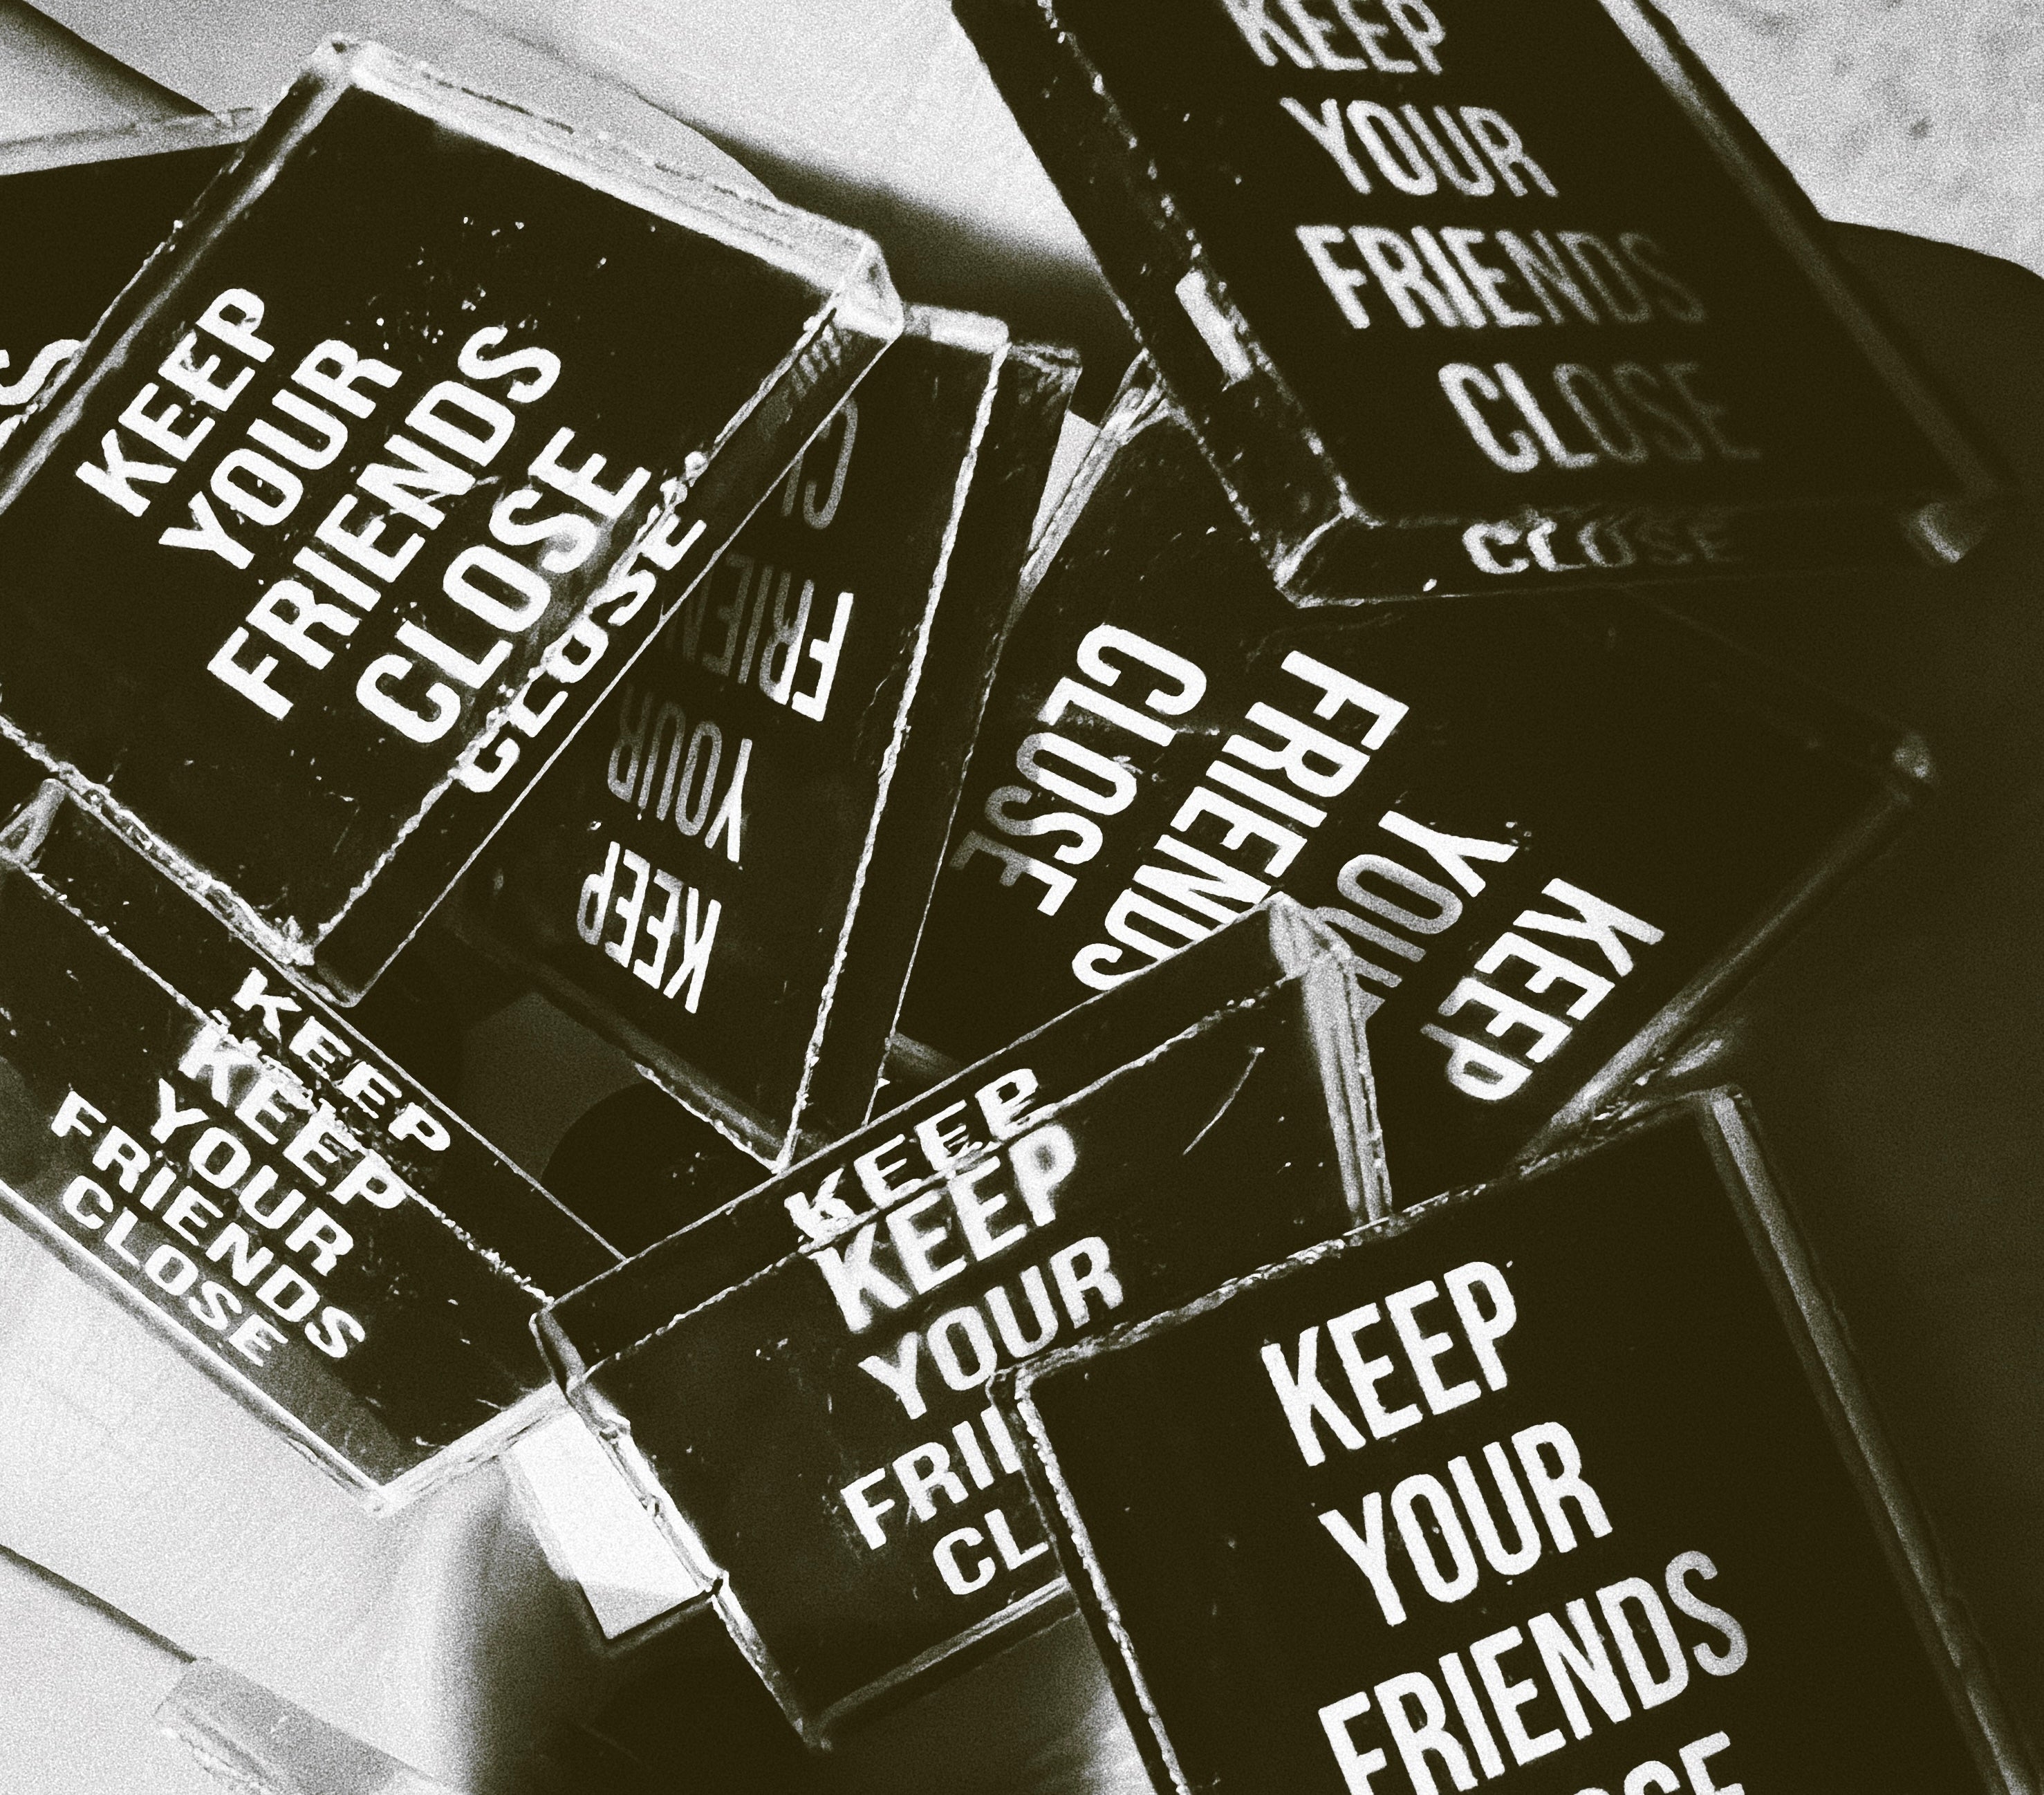 Keep Your Friends Close Collector's Pin (Limited to 25 Total)